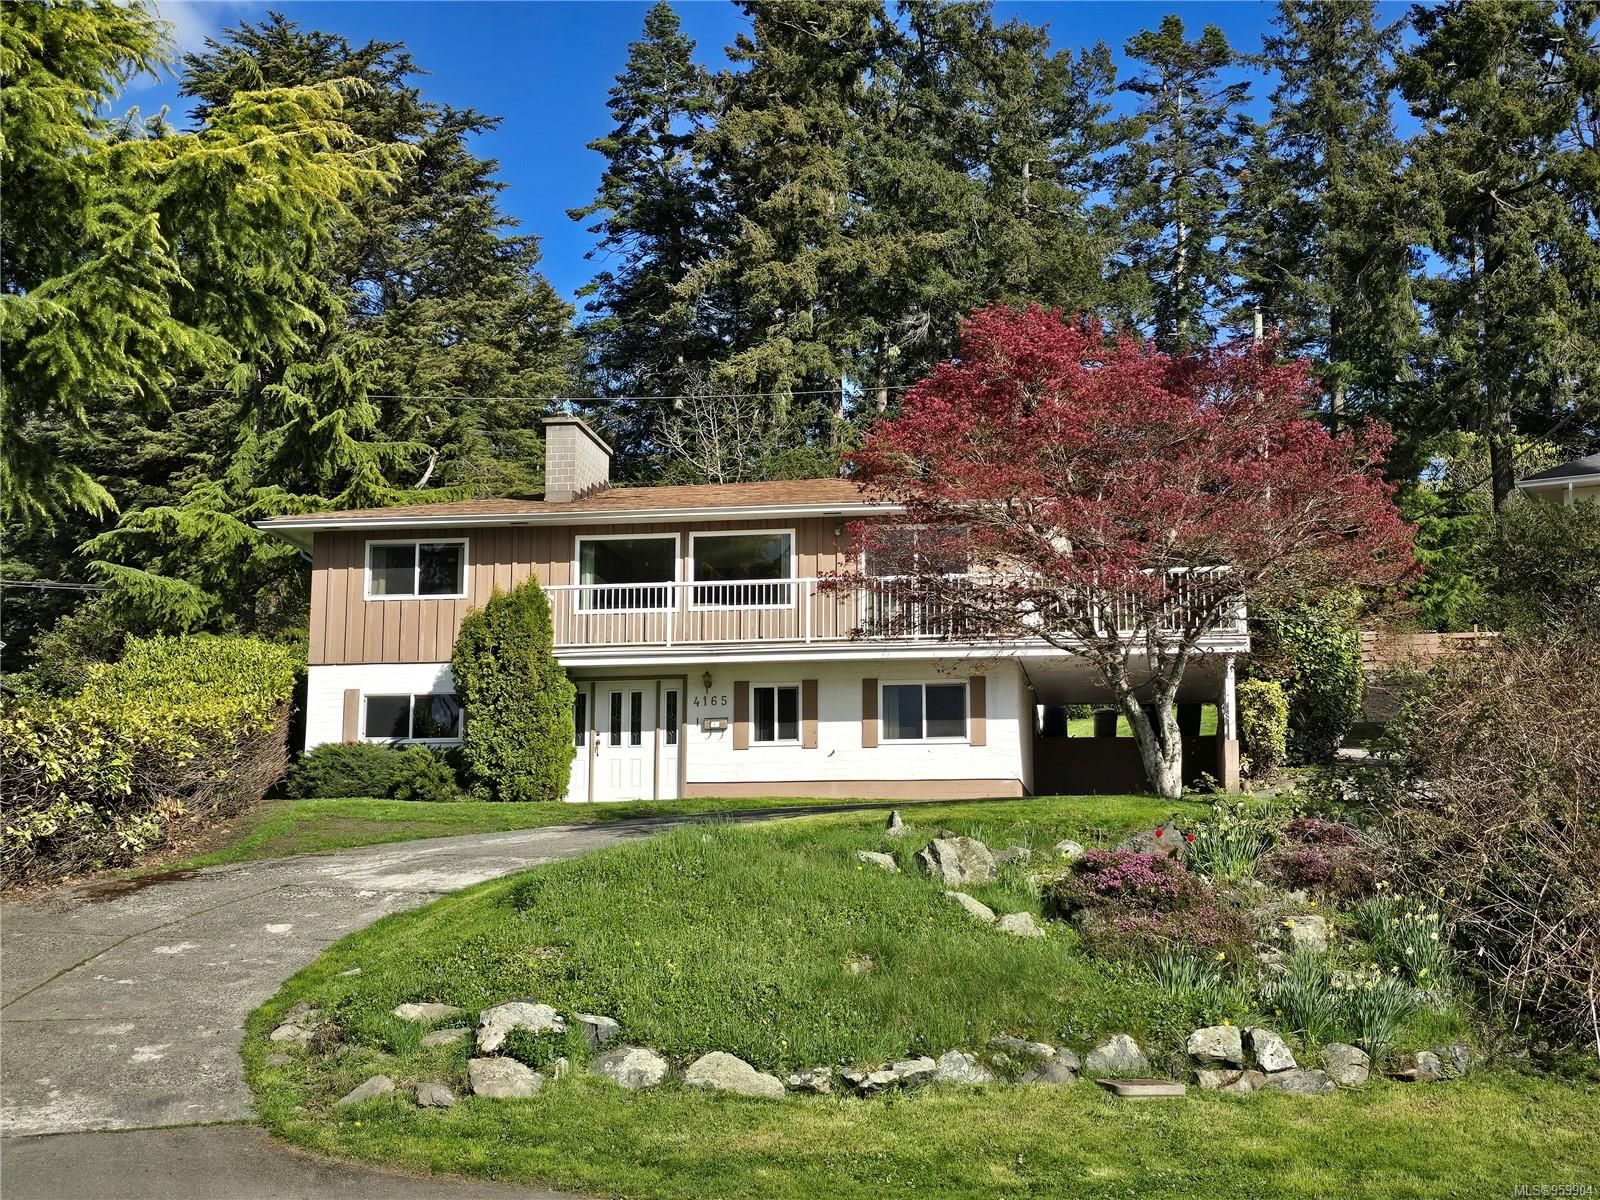 New property listed in SW Northridge, Saanich West